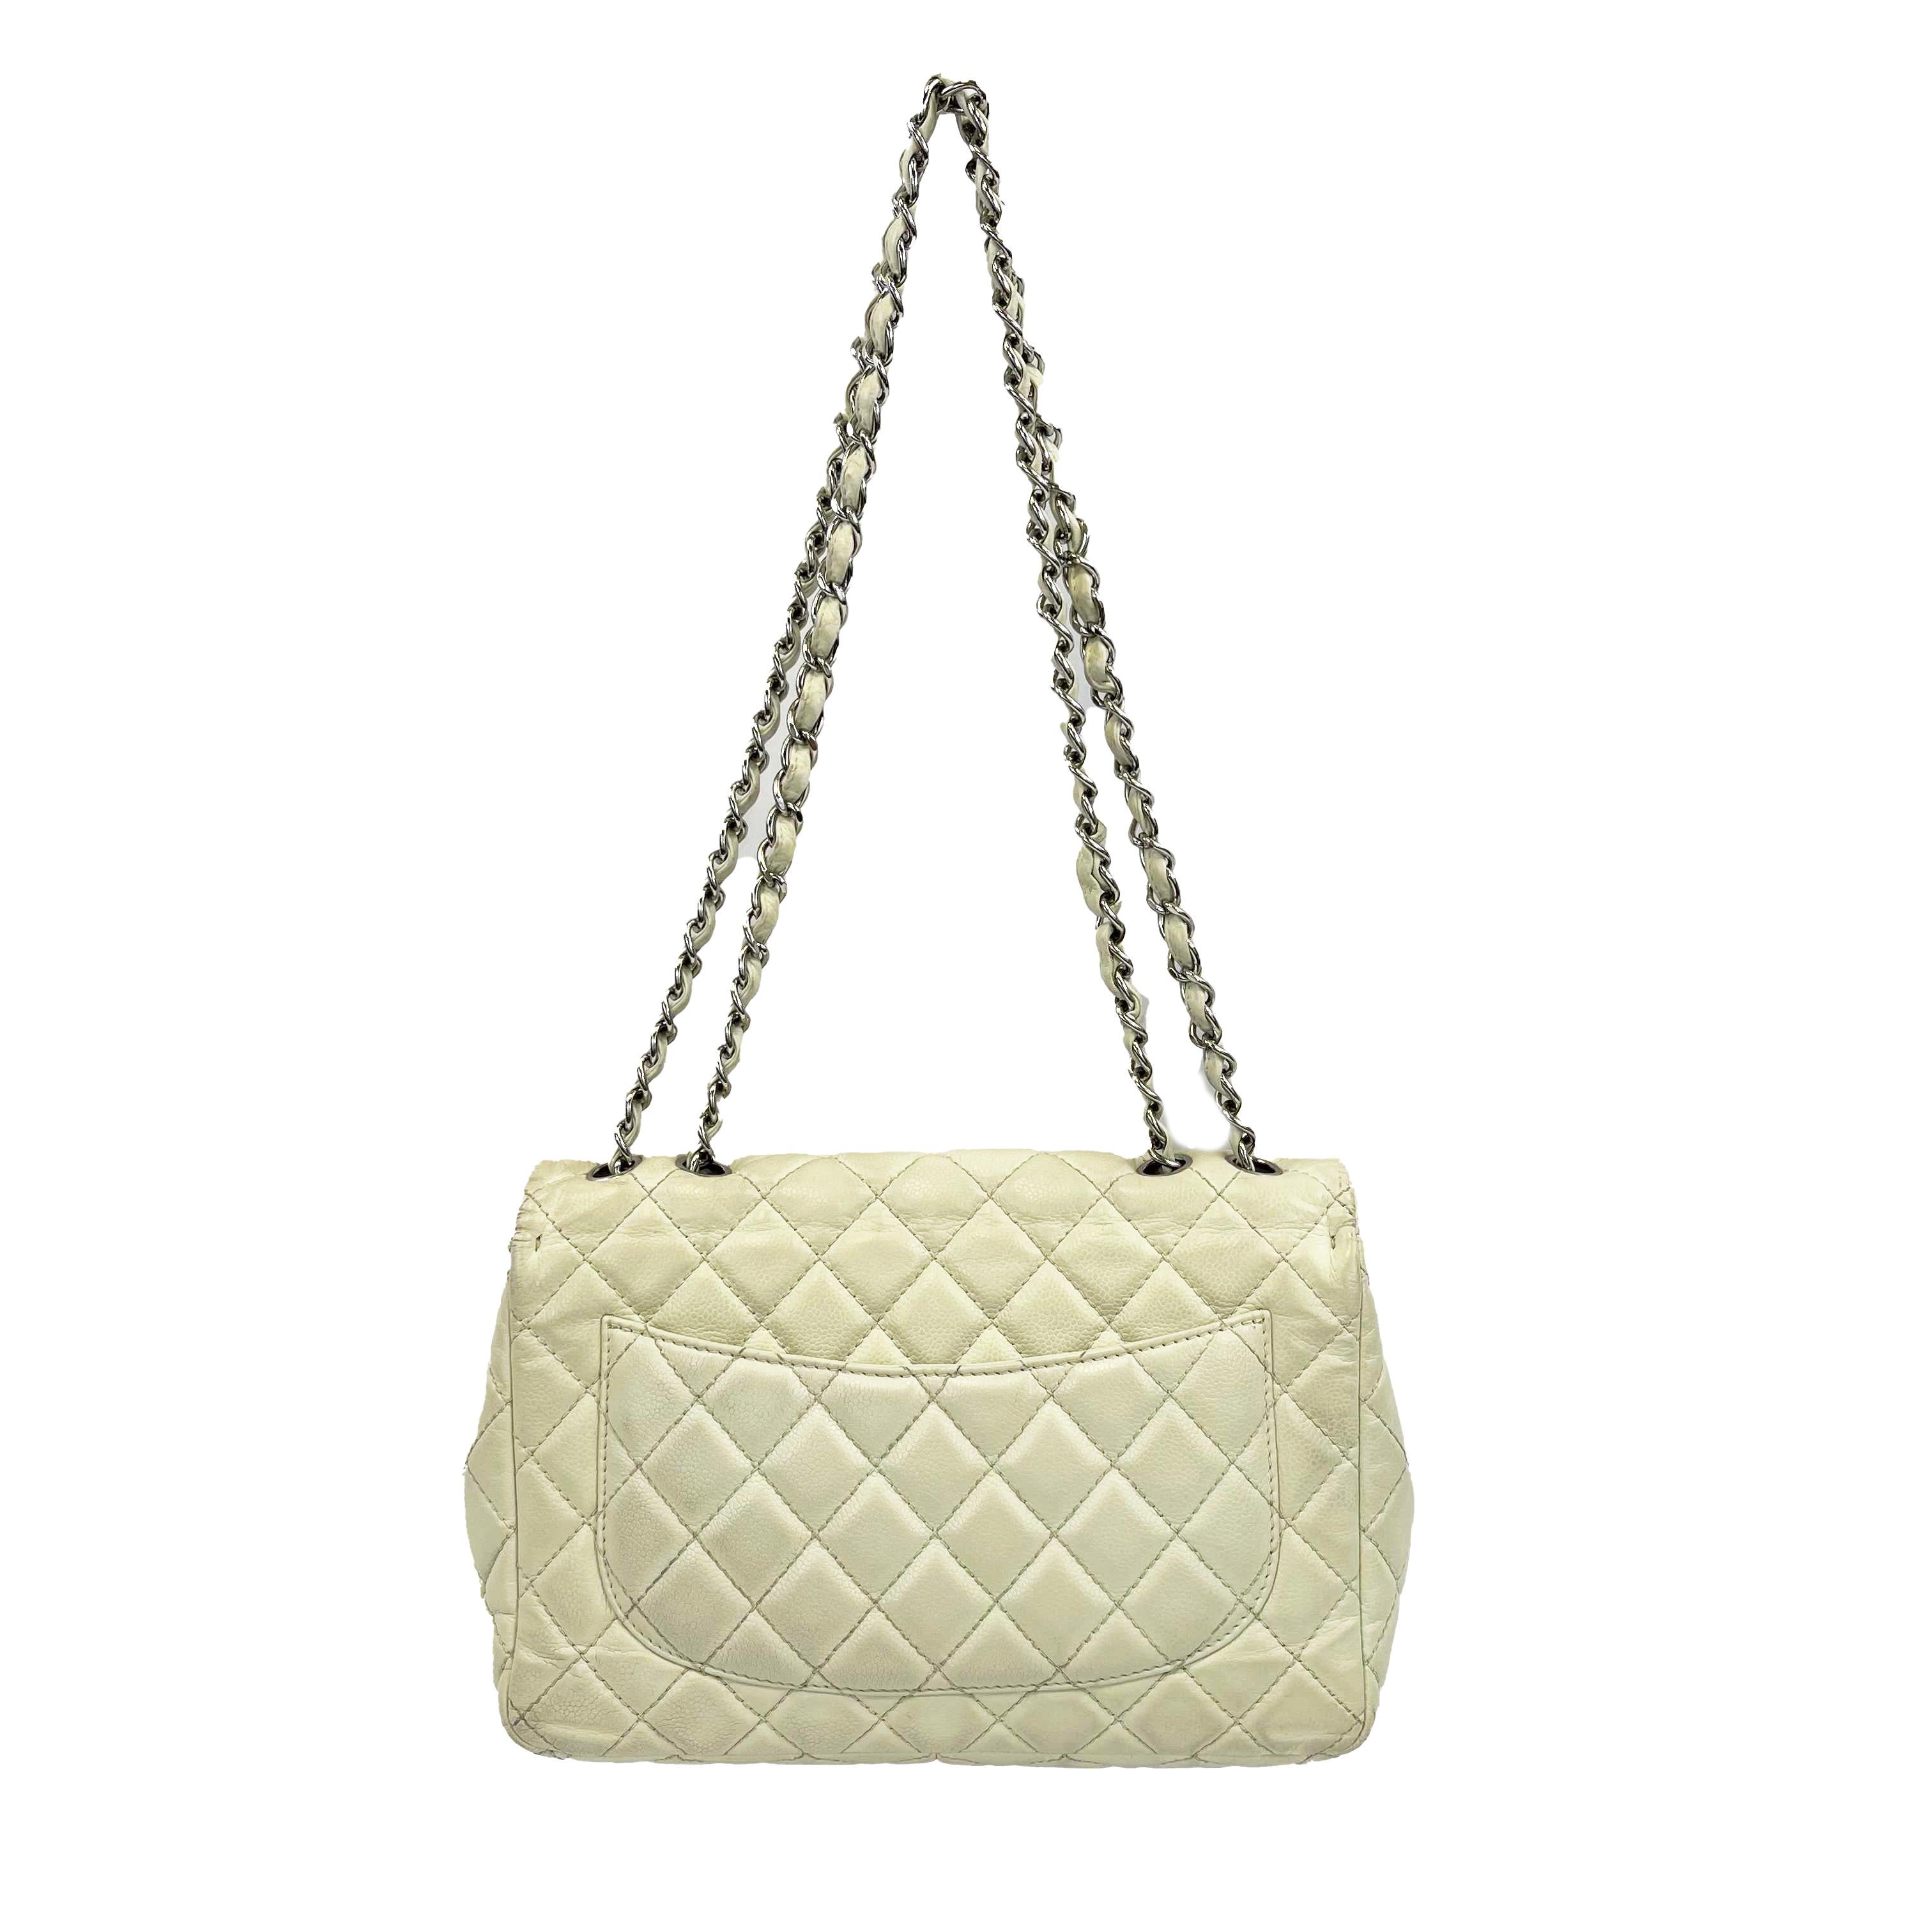 CHANEL - Classic Maxi CC Ecru Single Flap Shoulder Bag
Measurements

Width: 12 in / 30.48 cm
Height: 7.5 in / 19.05 cm
Depth: 3.25 in / 8.255 cm
Strap Drop: 25 in / 63.5 cm
Handle Drop: 13.5 in / 34.29 cm
Details

Made In: Italy
Color: